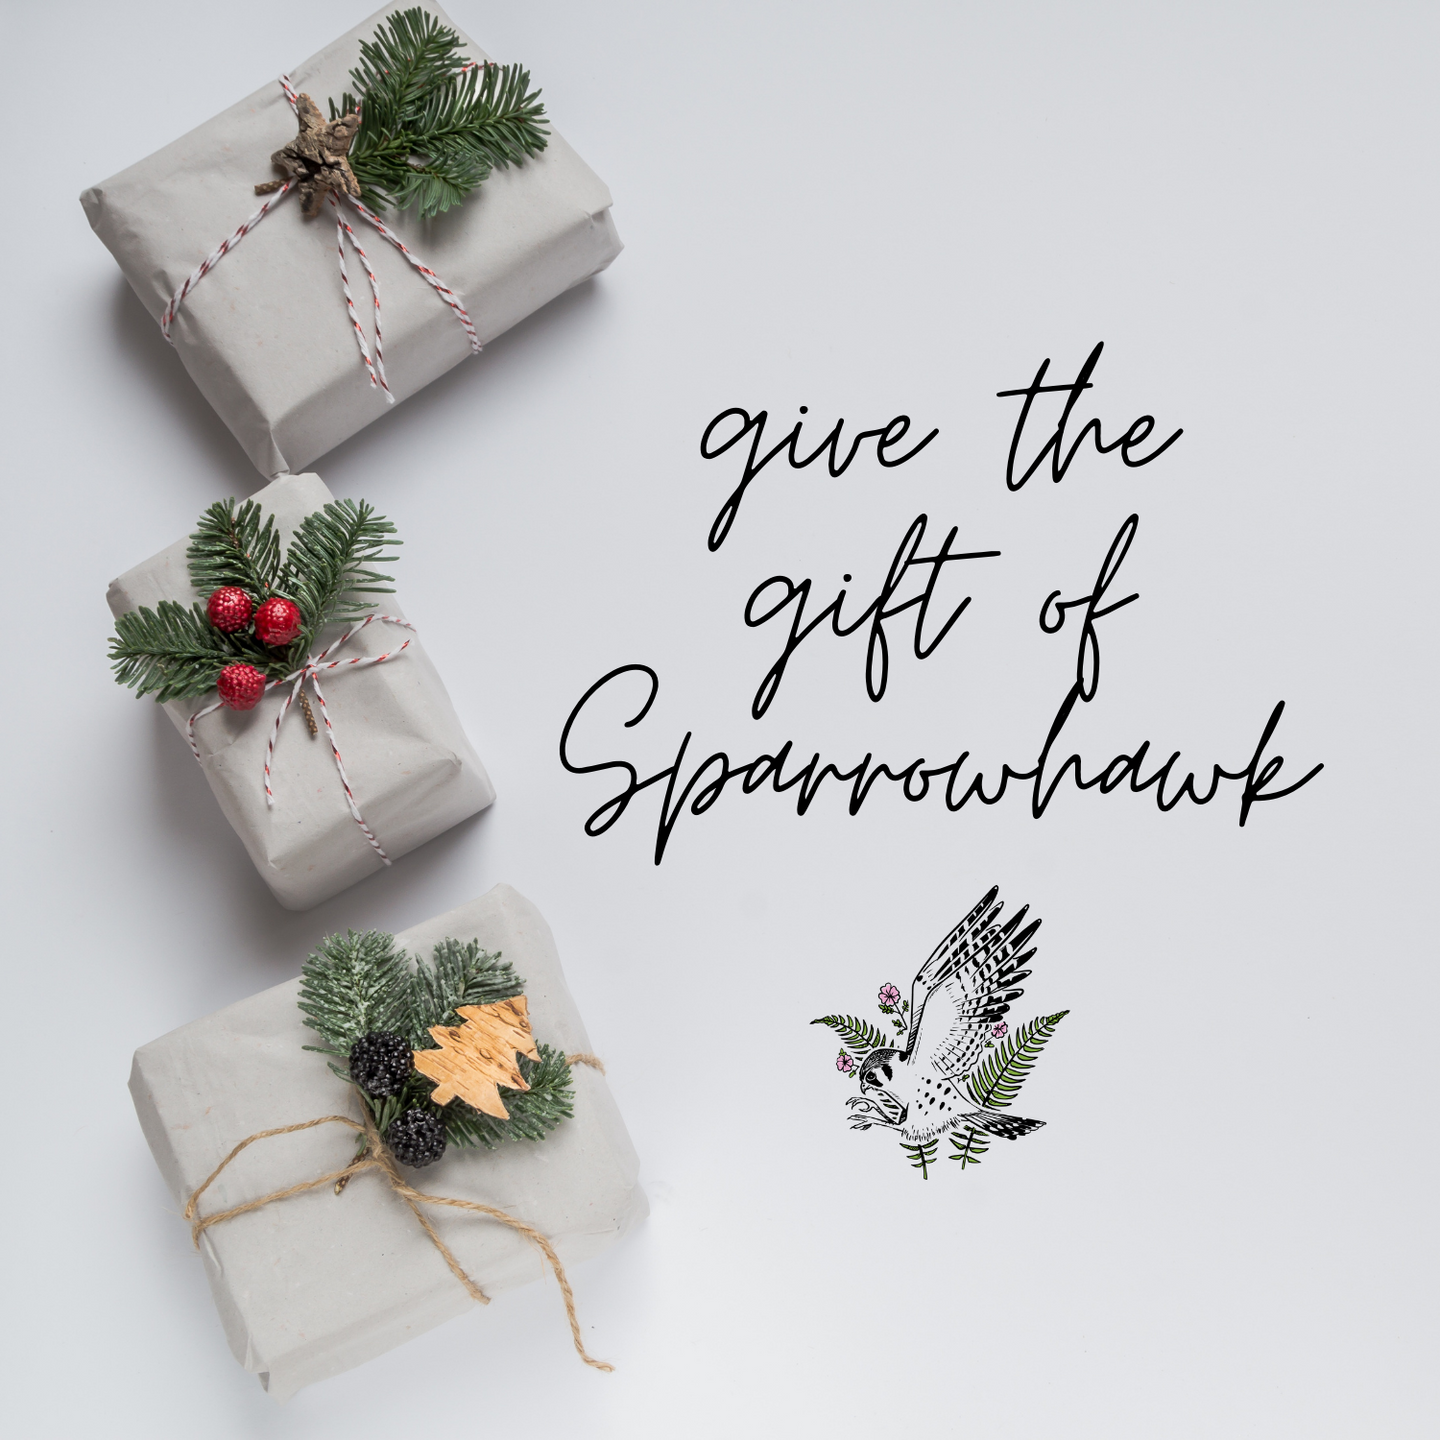 Give the gift of Native Plants with a gift card to Sparrowhawk Native Plants in Portland Oregon